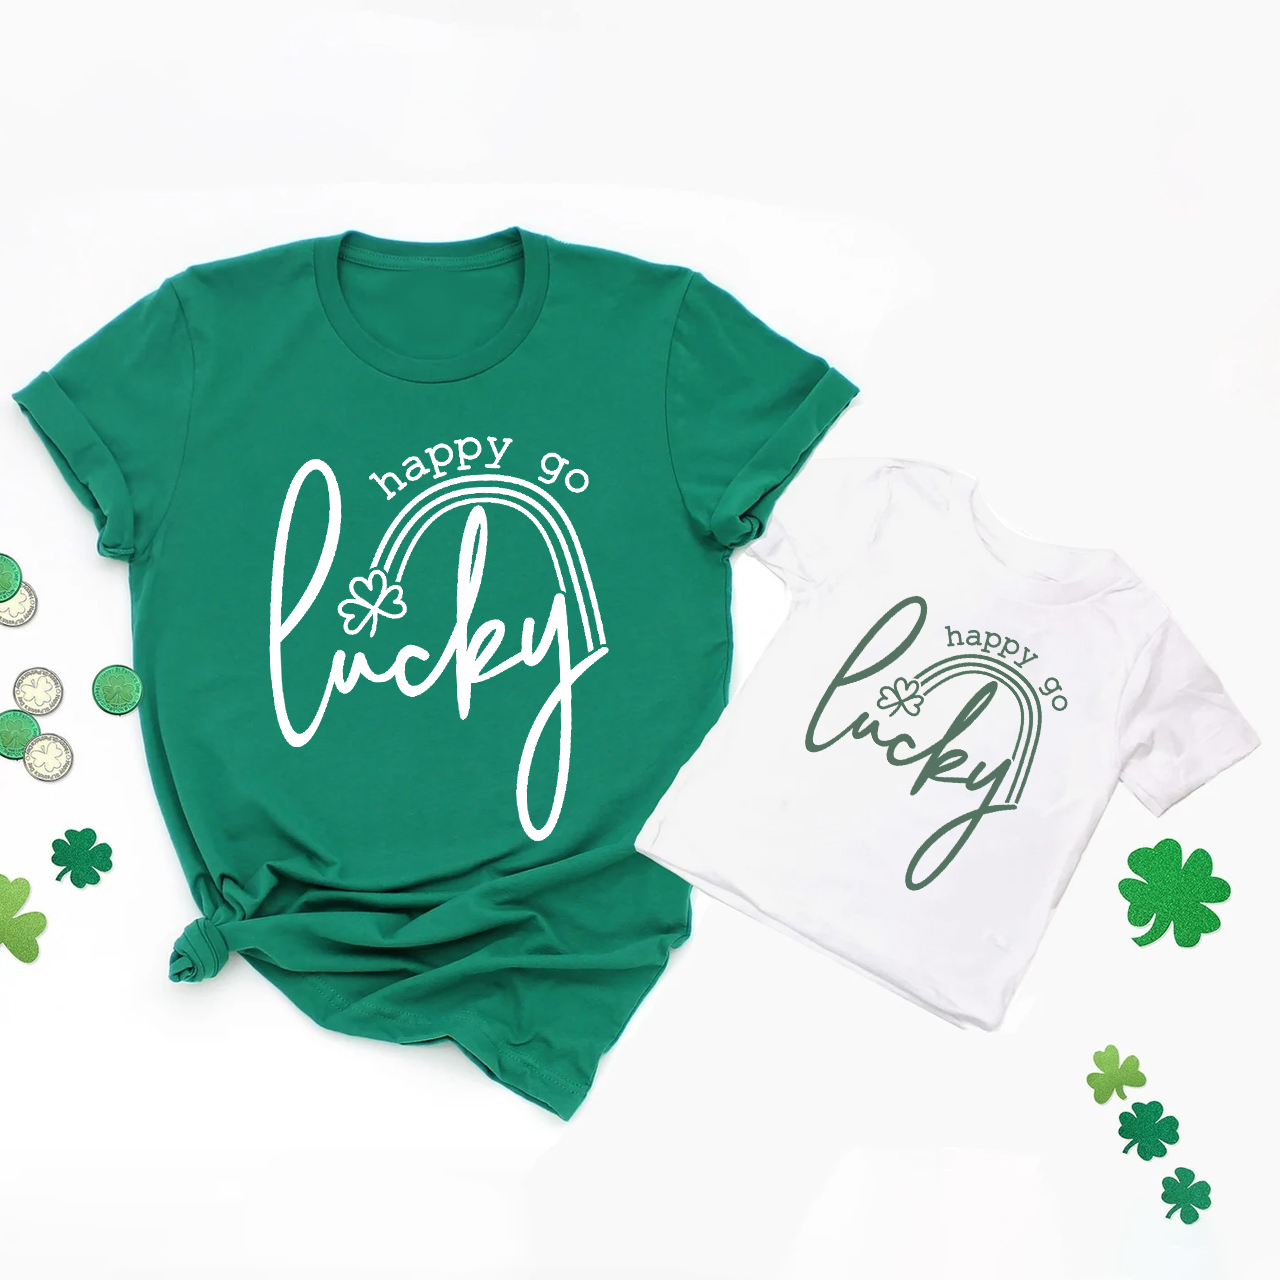 One Lucky Charm St Patrick's Day Matching Shirt